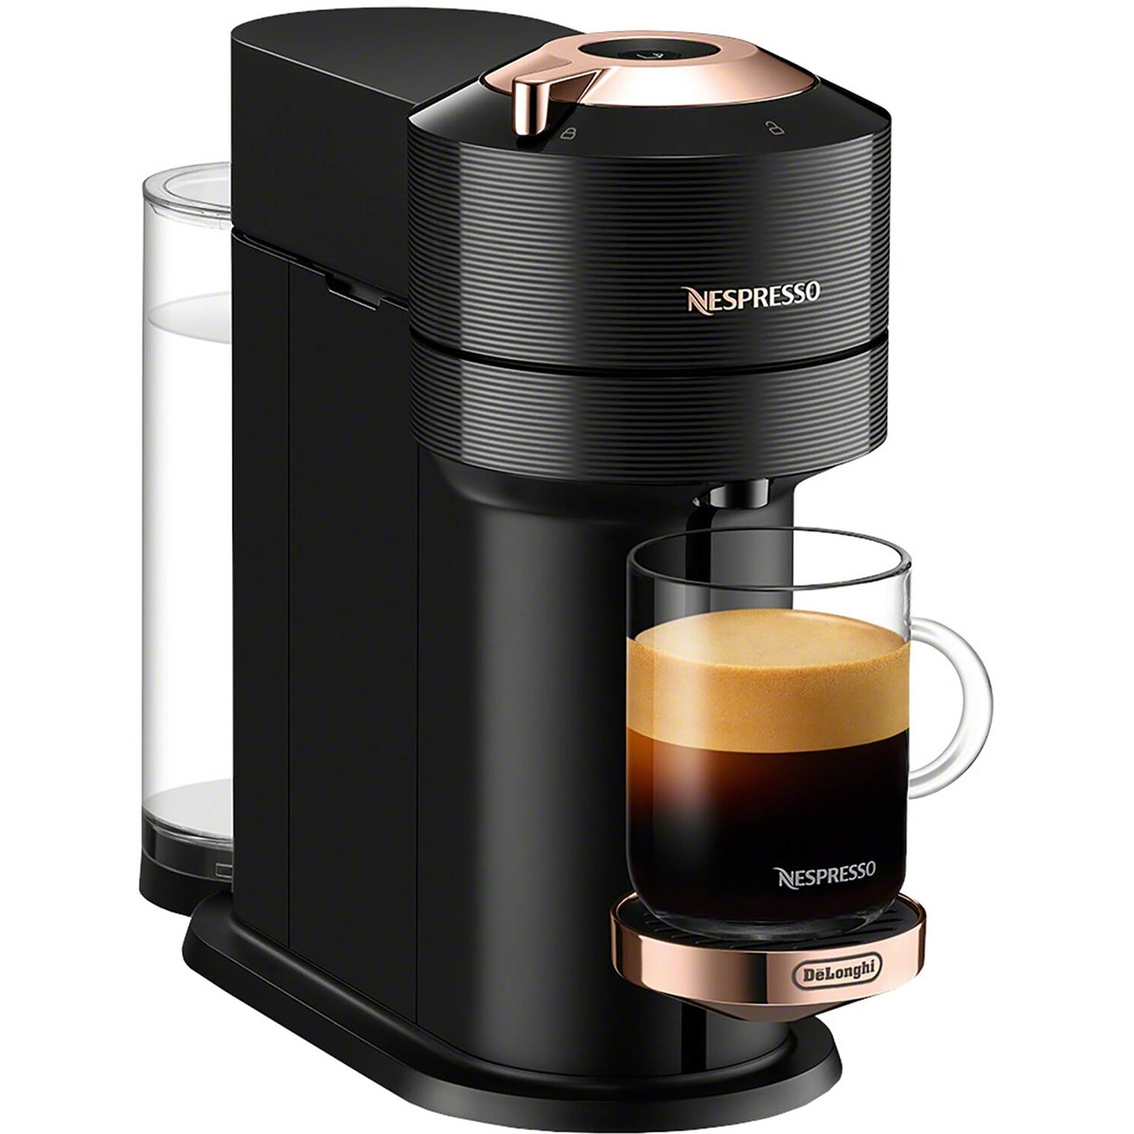 Nespresso by De'Longhi Premium Coffee and Espresso Maker with Milk Frother - Image 2 of 7